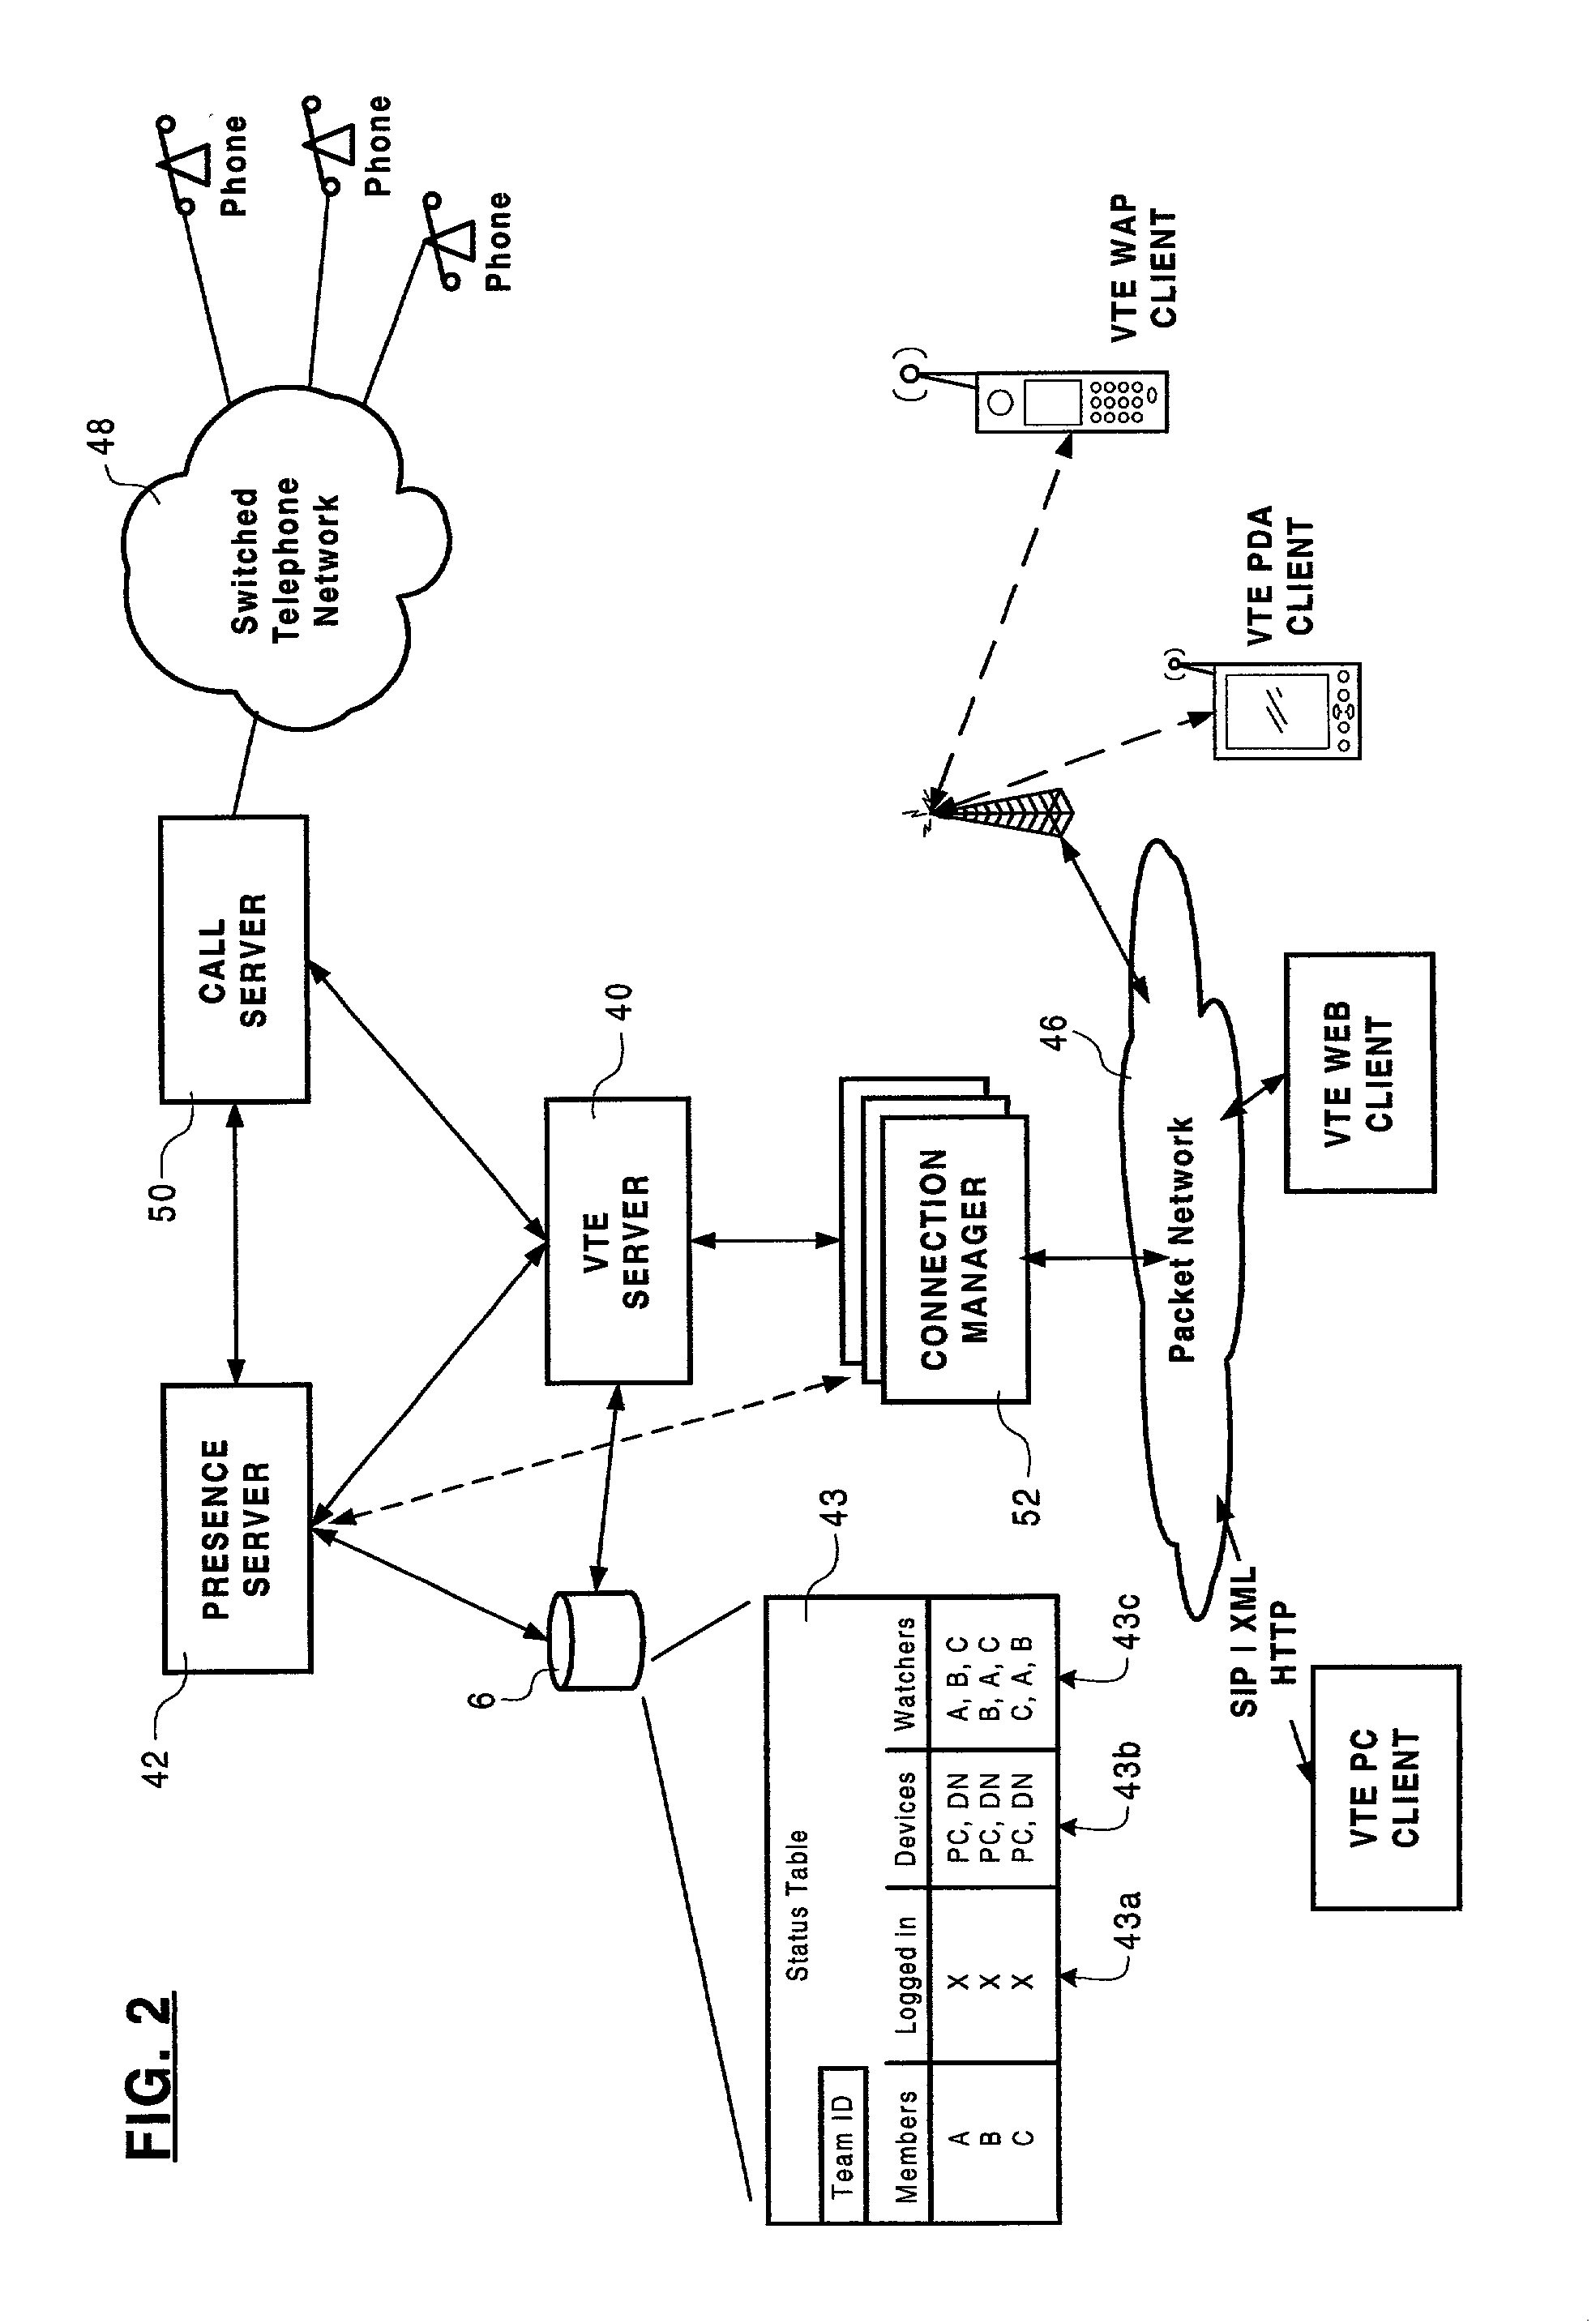 Method of team member profile selection within a virtual team environment